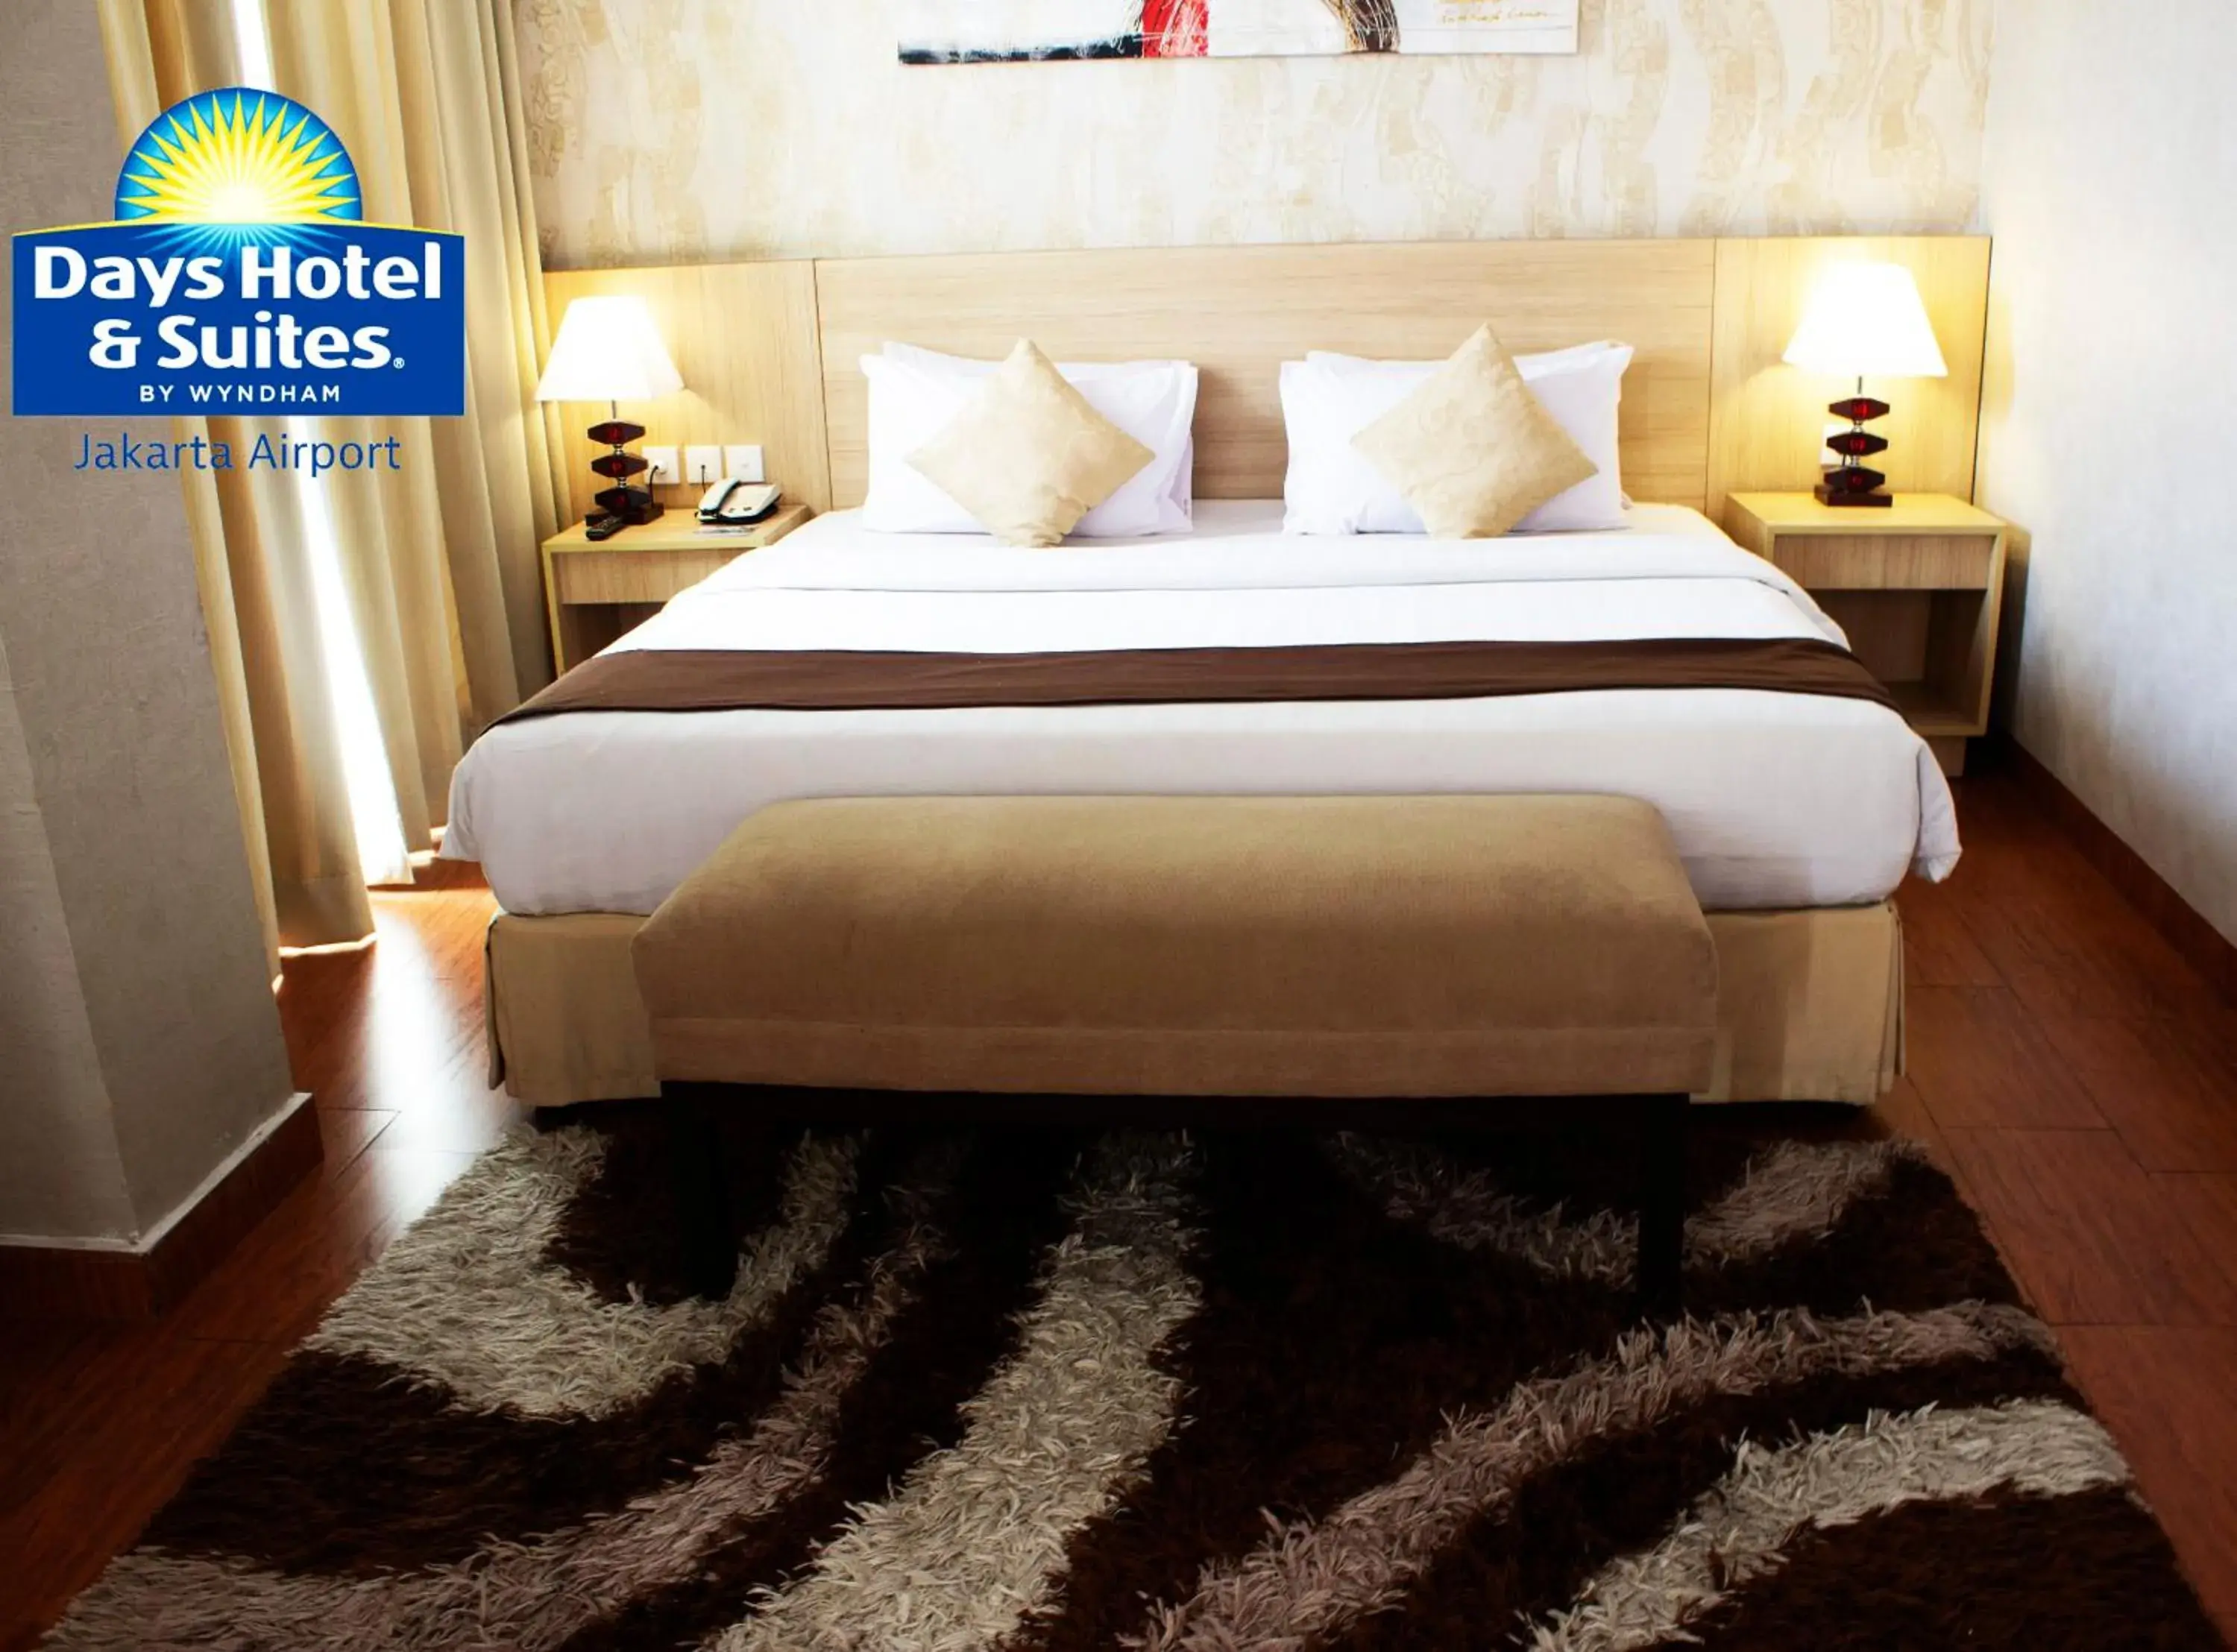 Bed in Days Hotel And Suites Jakarta Airport